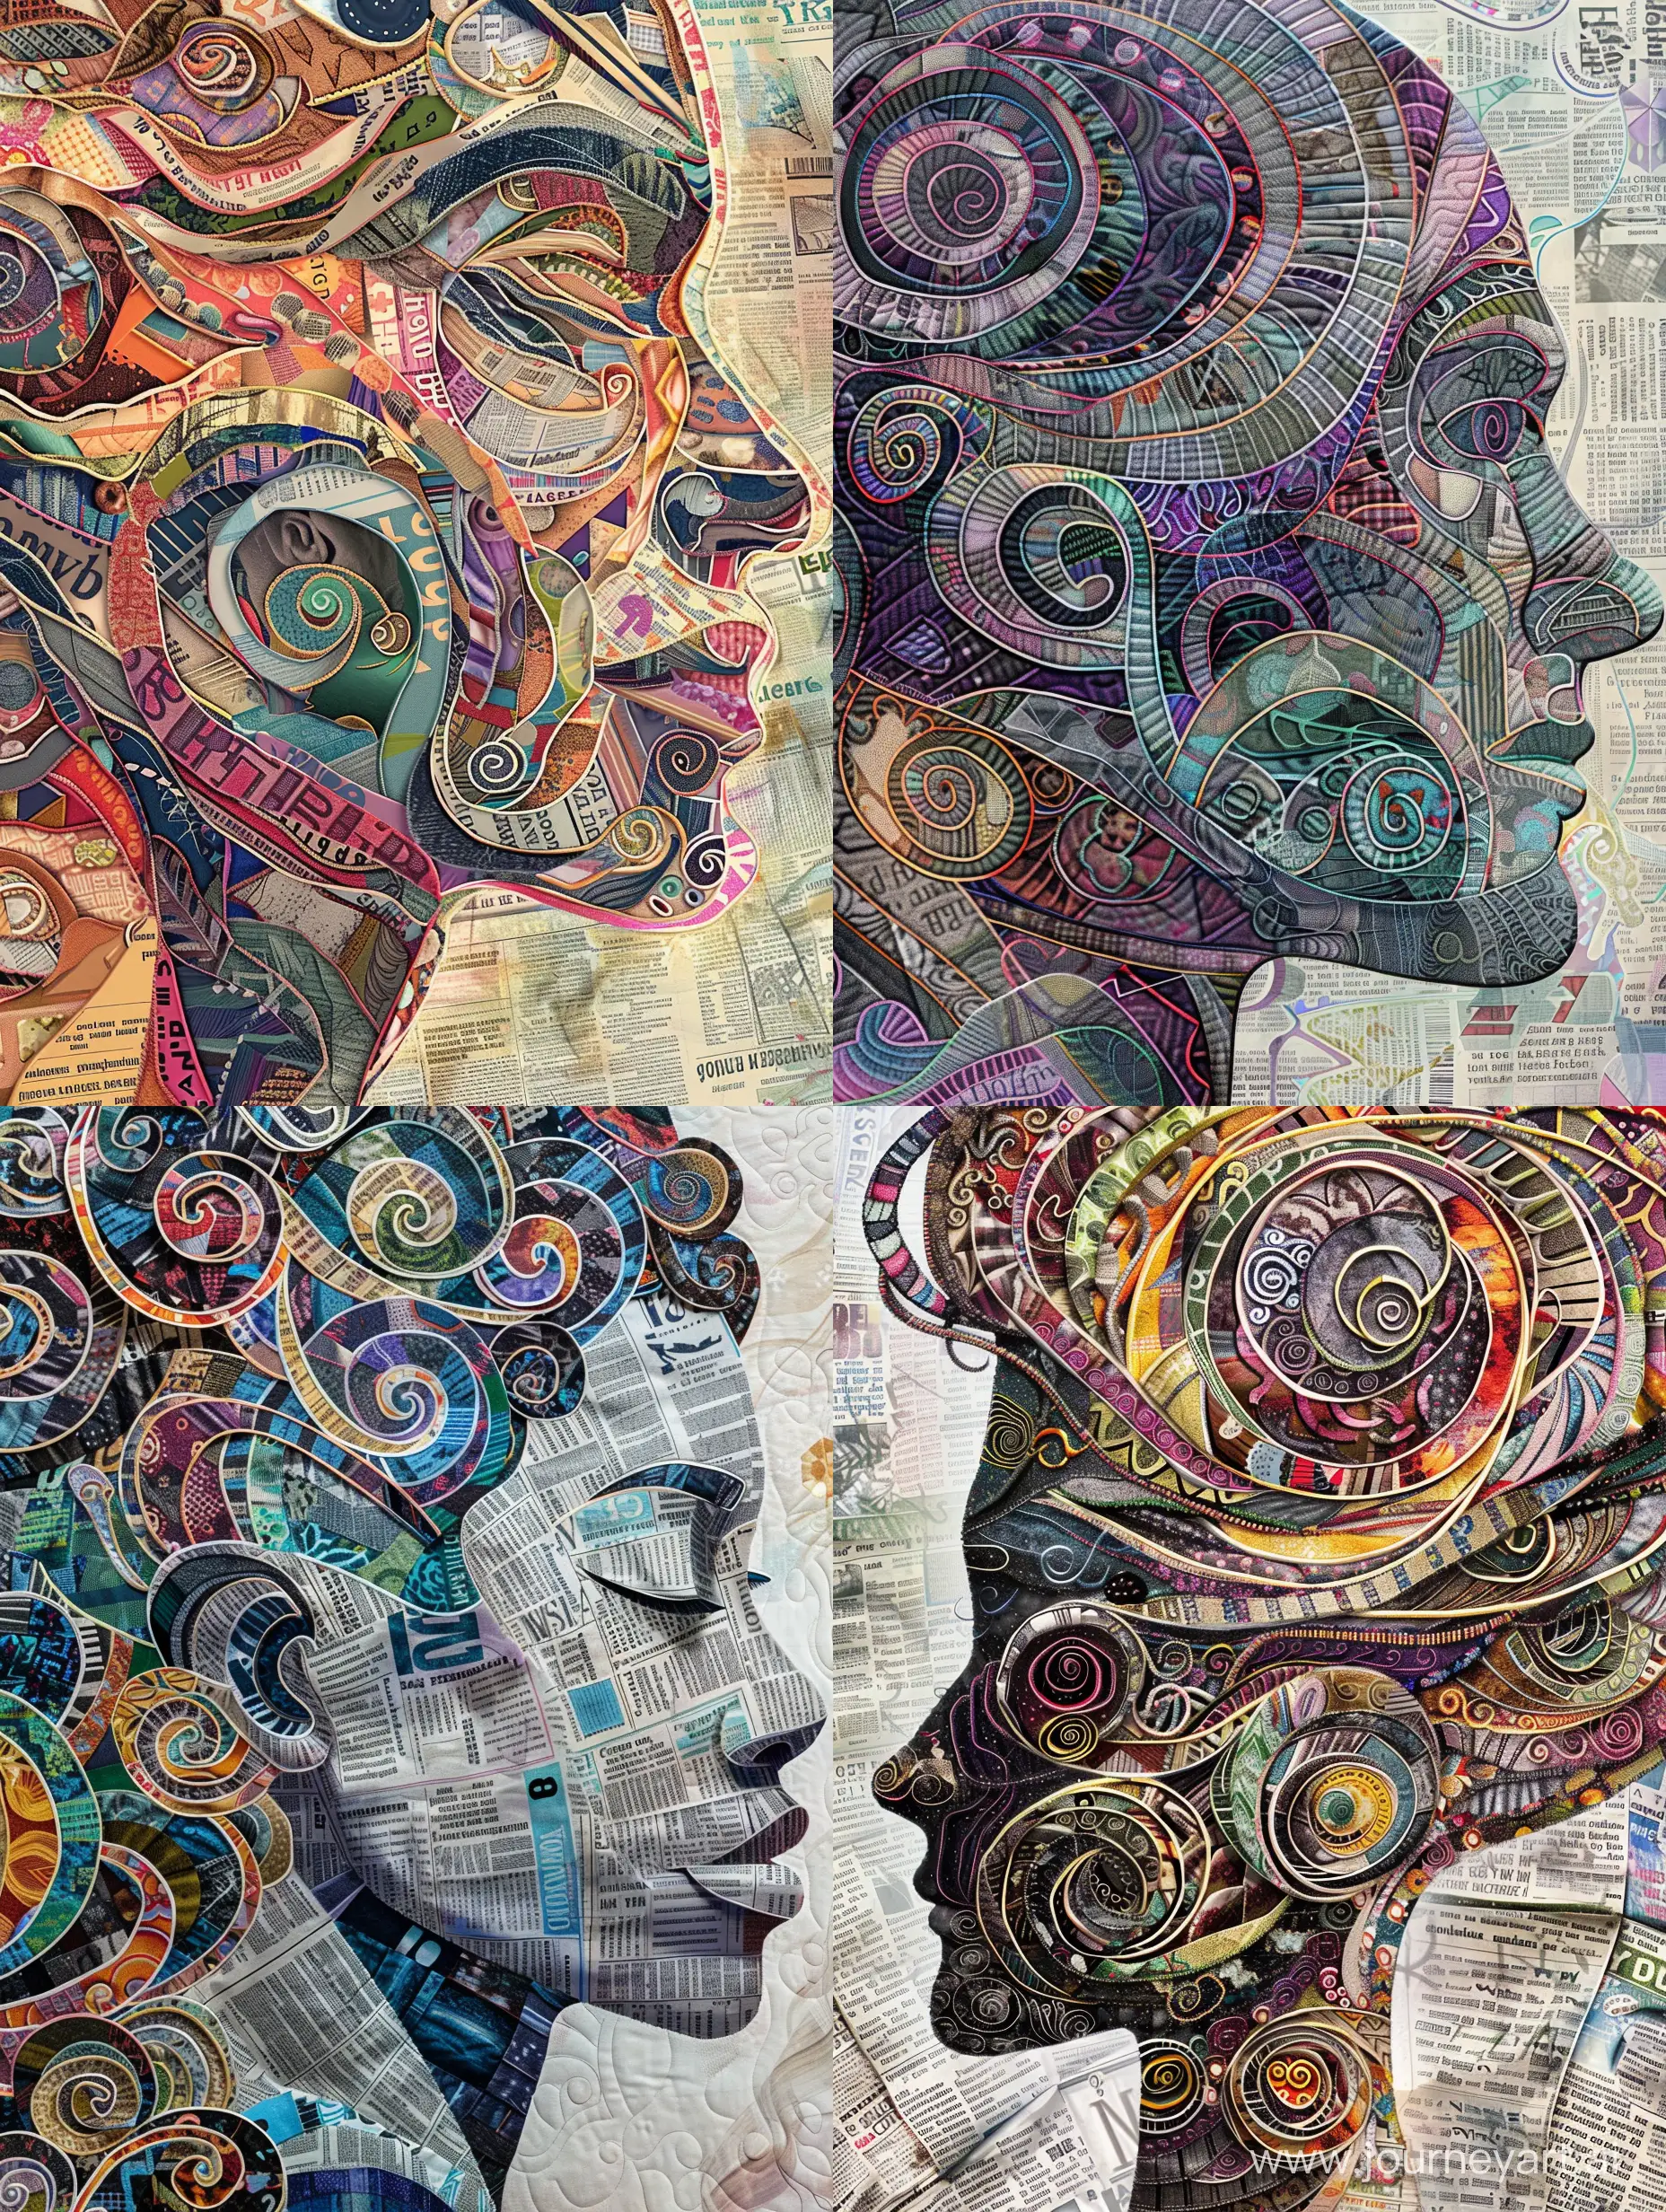 Multi-exposure, 9:16--v, close-up, hyper detailed, head combined of contemporary quilts, mixed media newspapers cllips, covered in swirls, text stylized,точечная прорисовка, детальная прорисовка, solid geometry, vector graphics, a lot of details, ethnic patterns,